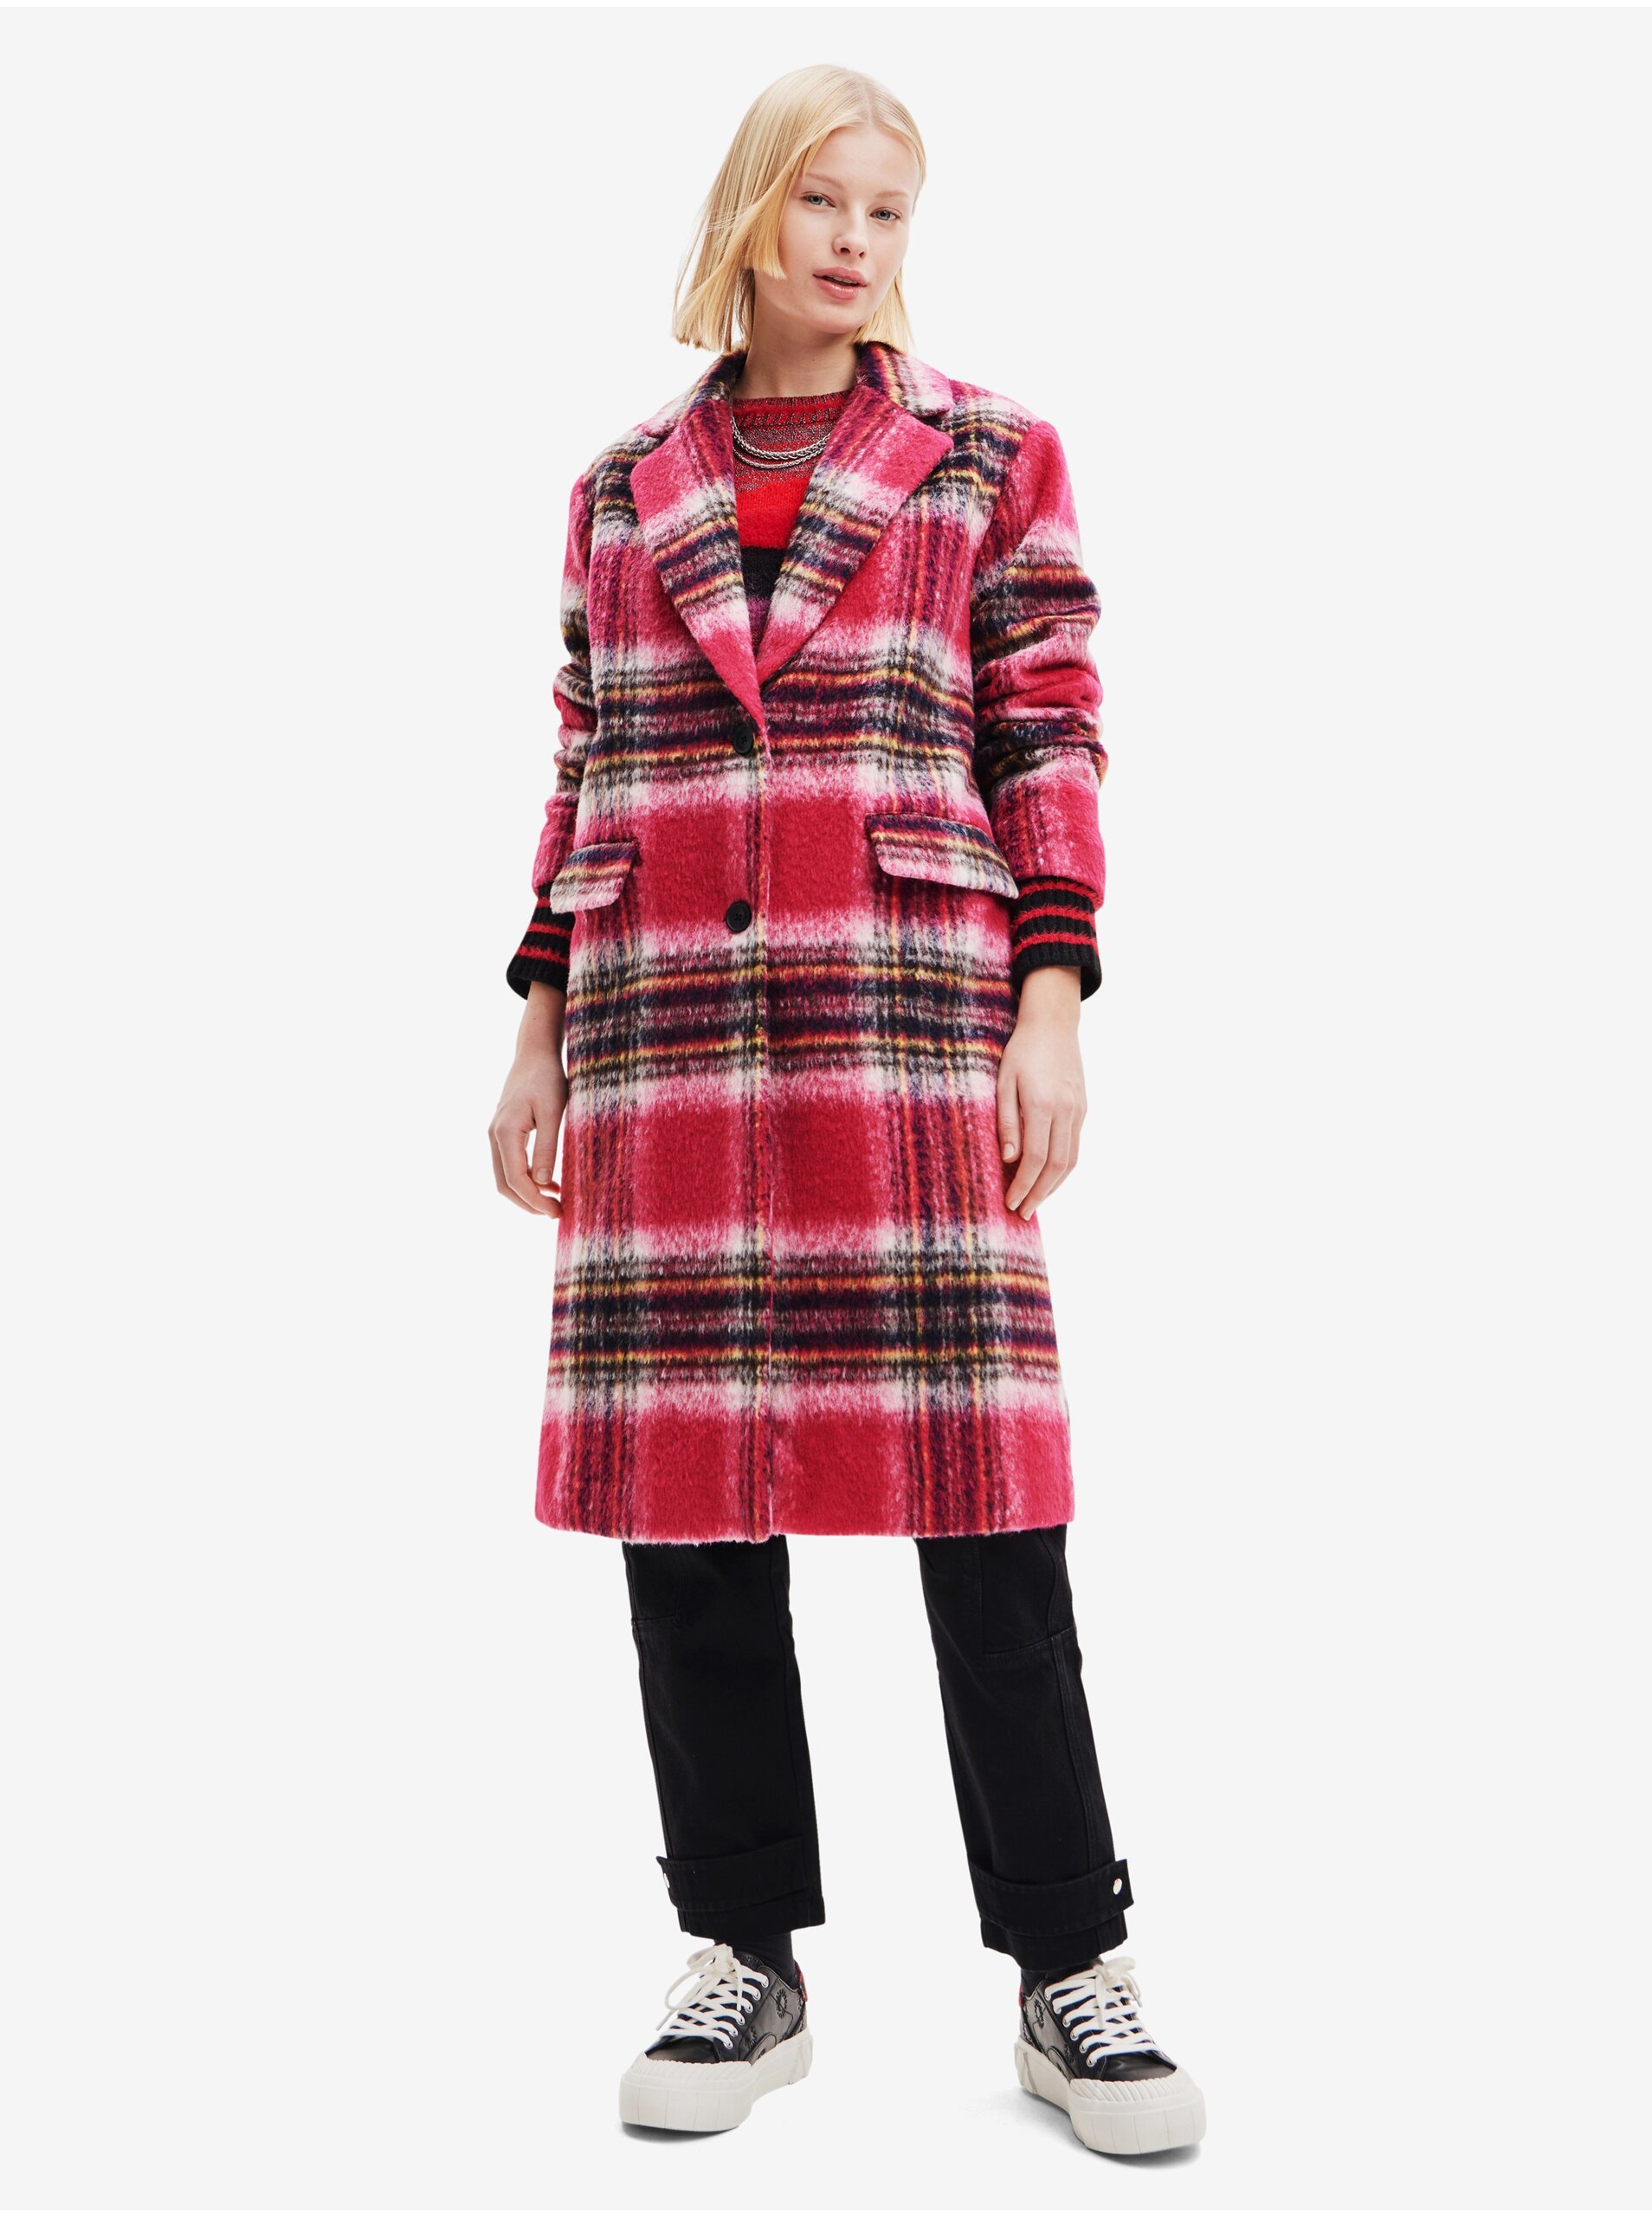 Women's pink plaid coat with wool Desigual Tommy - Women